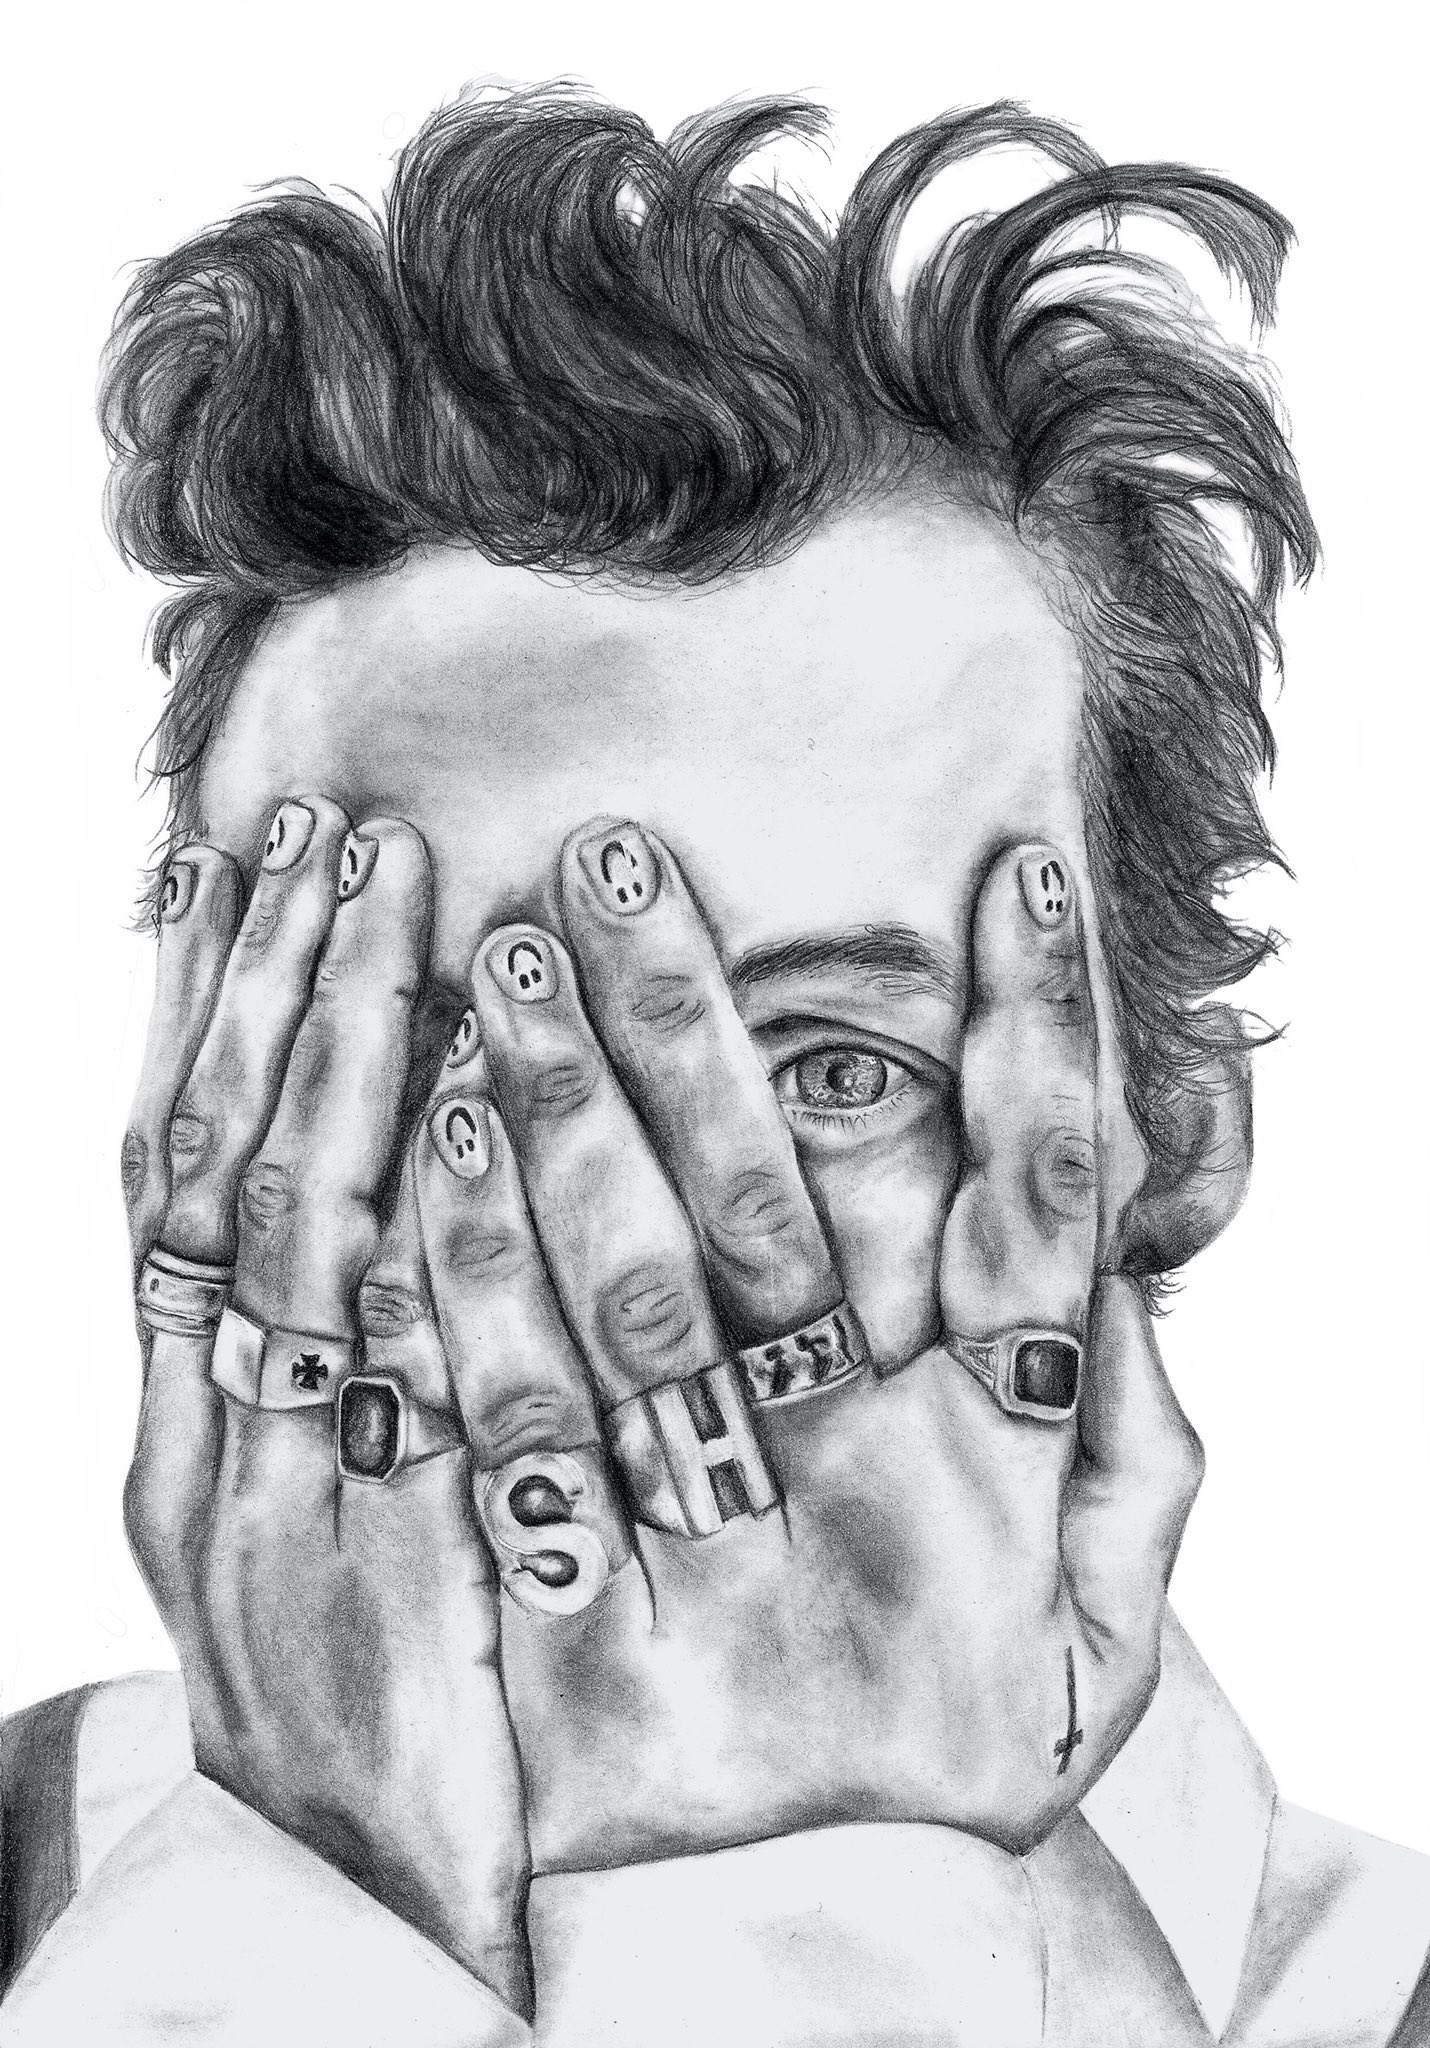 Harry Styles drawing  My pencil drawing of Harry Styles  ElizabethHudy   Flickr